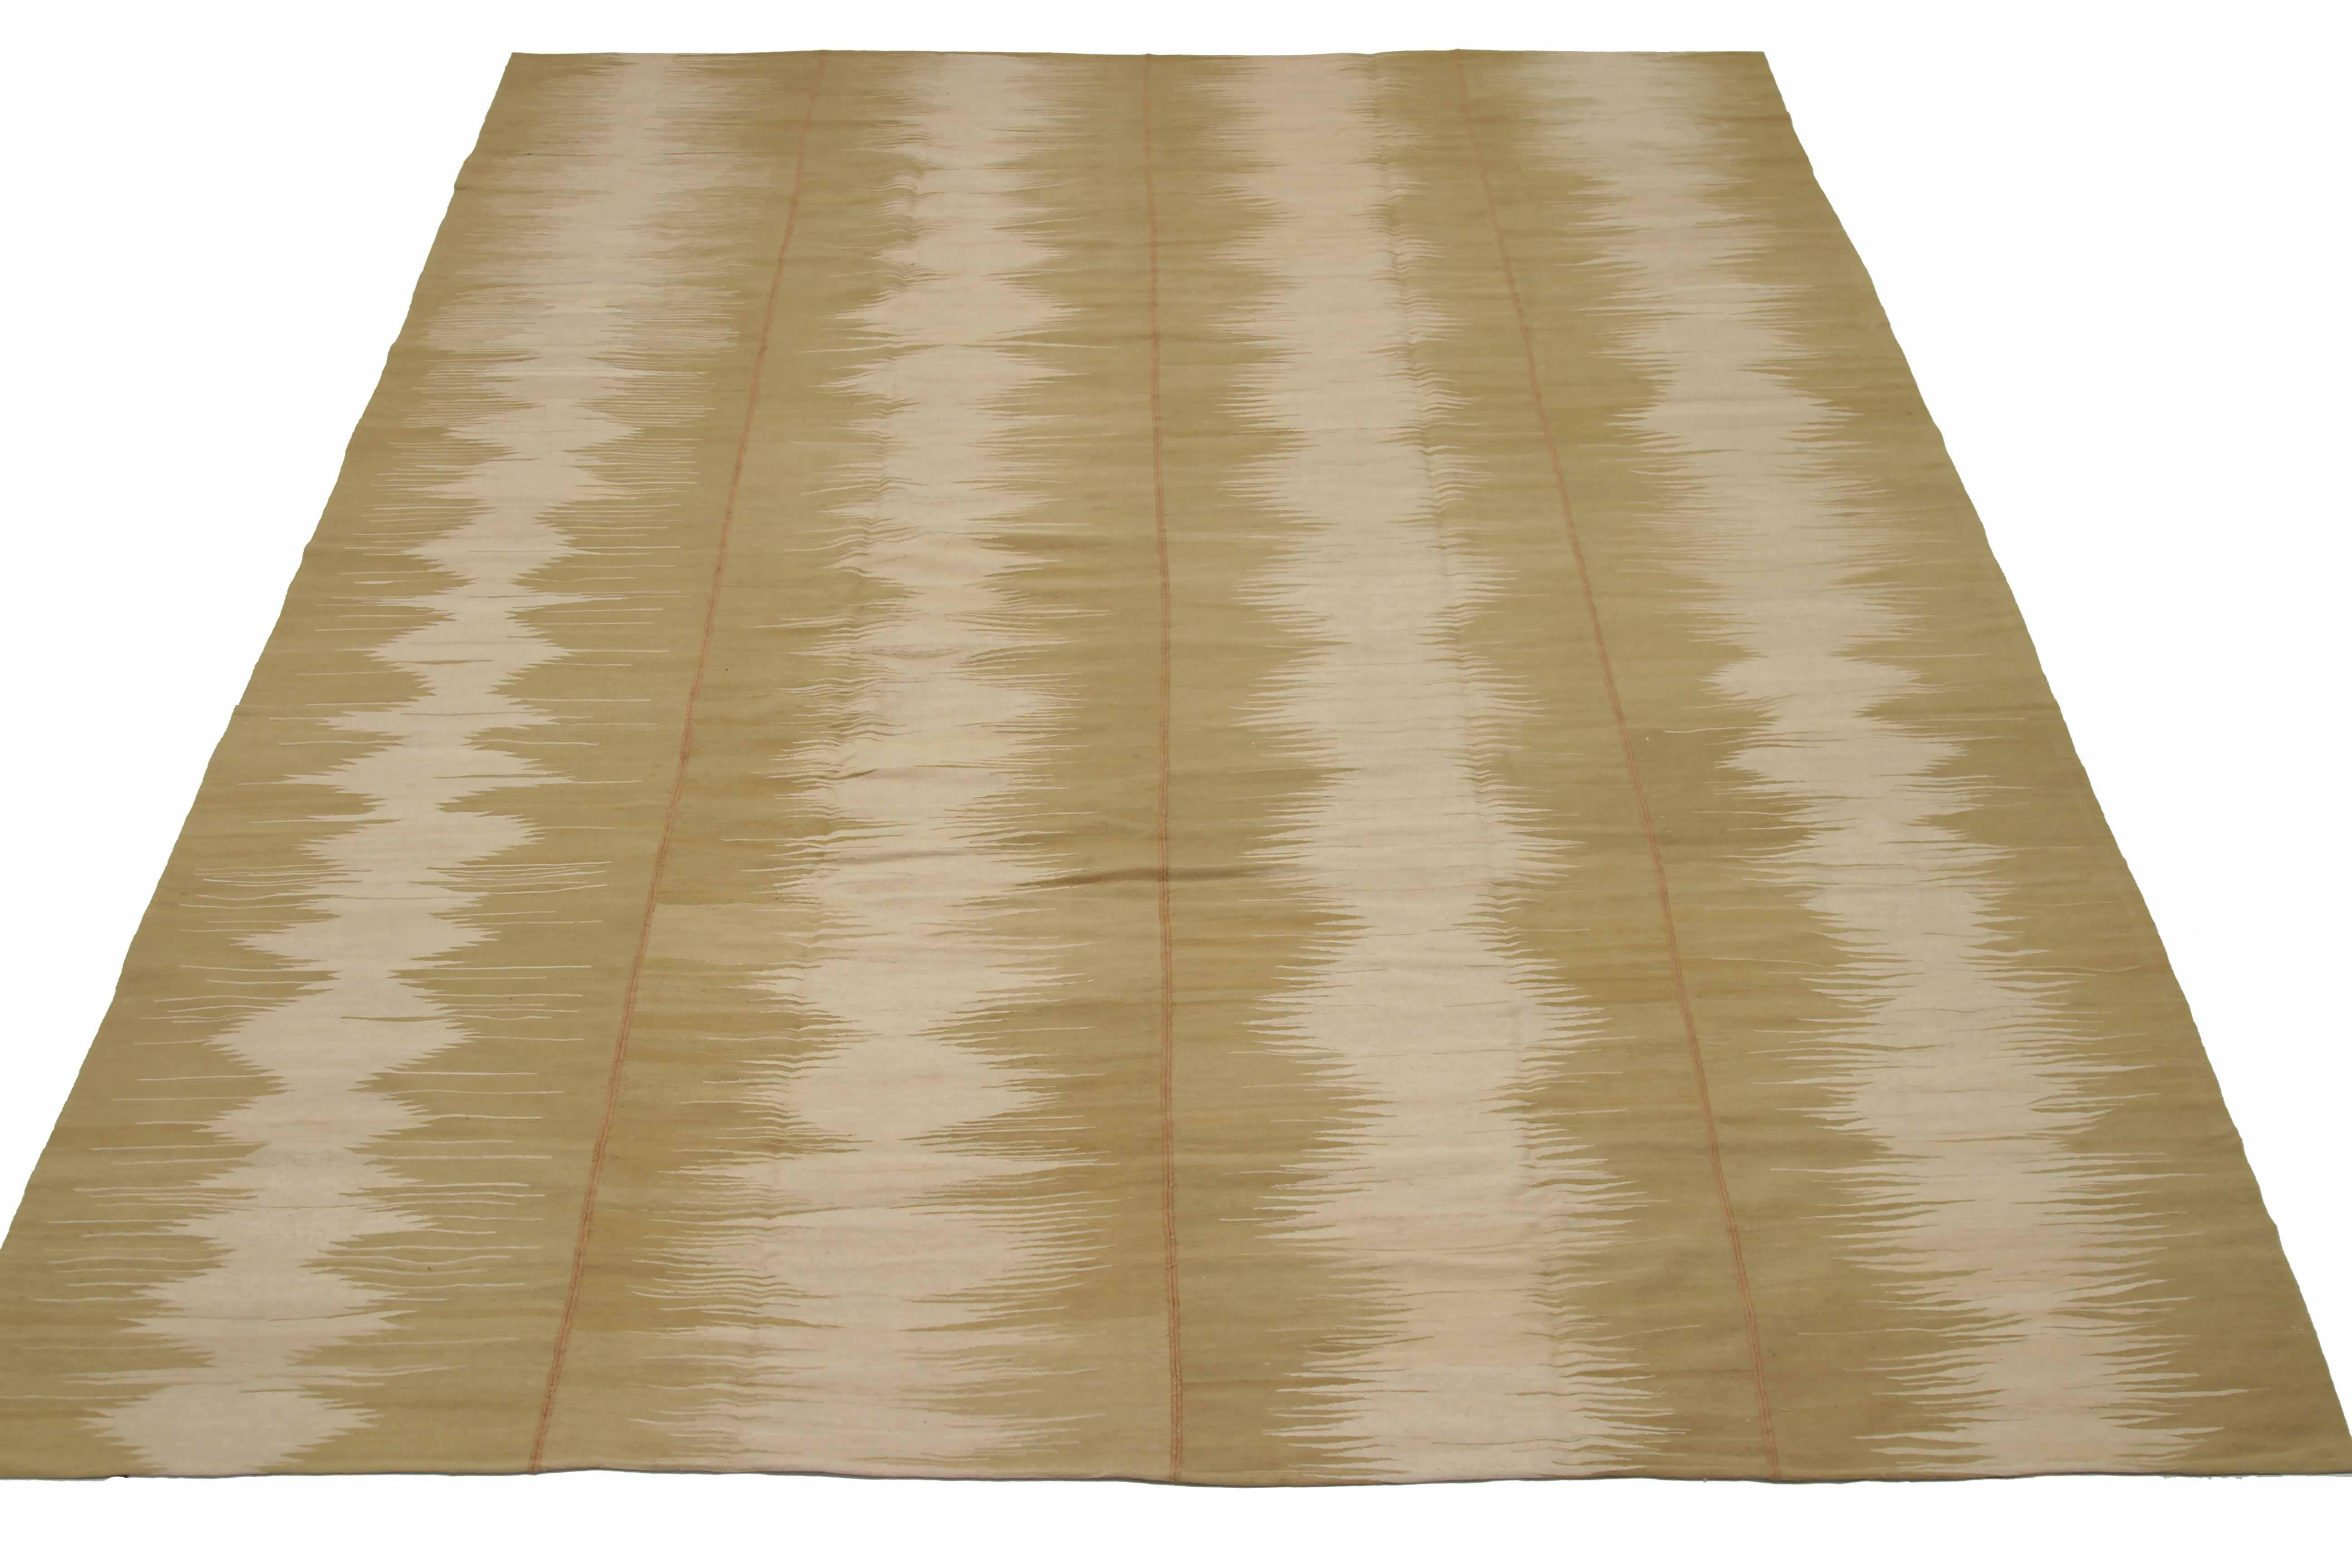 Antique handmade Persian area rug from high quality sheep’s wool and colored with eco-friendly vegetable dyes that are proven safe for humans and pets alike. It’s a Classic Kilim design showcasing a sound wave pattern on a brown field. It’s a lovely